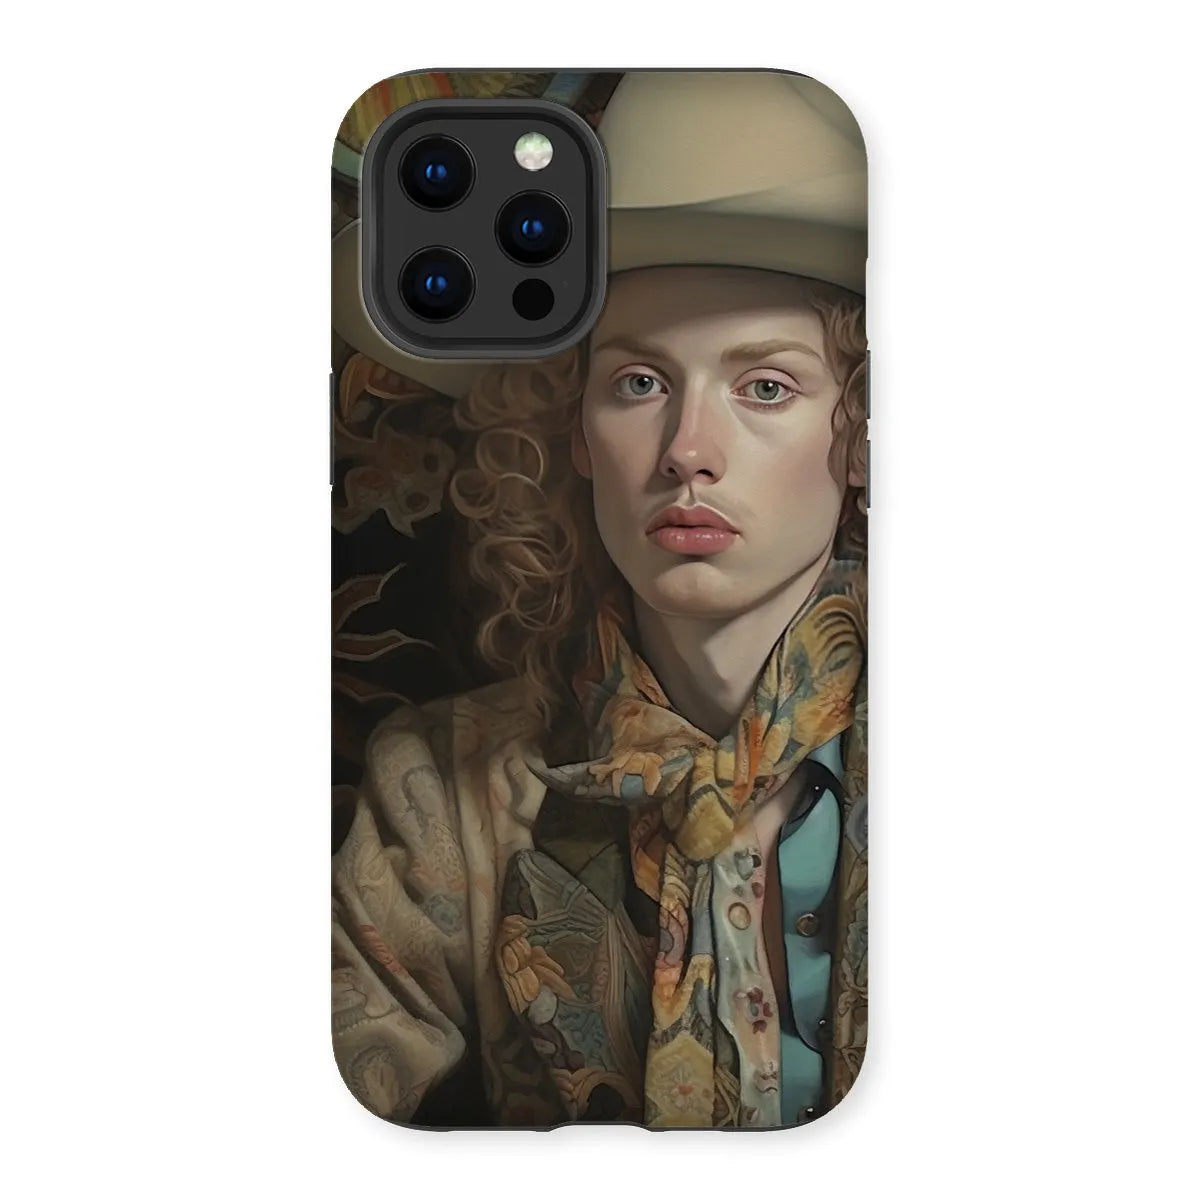 Ollie The Transgender Cowboy - F2m Dandy Outlaw Phone Case - Iphone 12 Pro Max / Matte - Mobile Phone Cases - Aesthetic